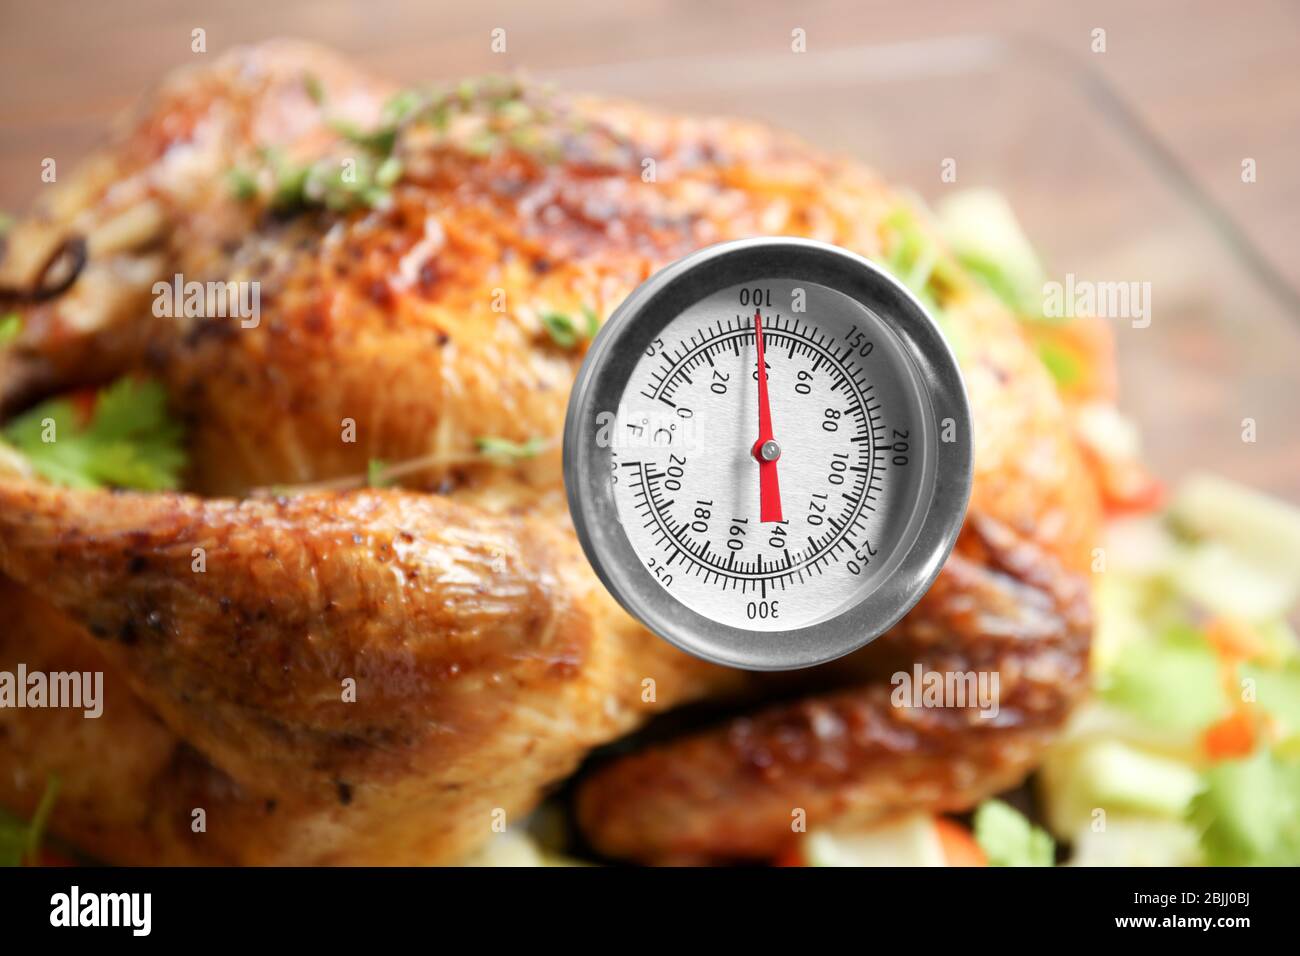 https://c8.alamy.com/comp/2BJJ0BJ/golden-roasted-turkey-with-meat-thermometer-close-up-2BJJ0BJ.jpg